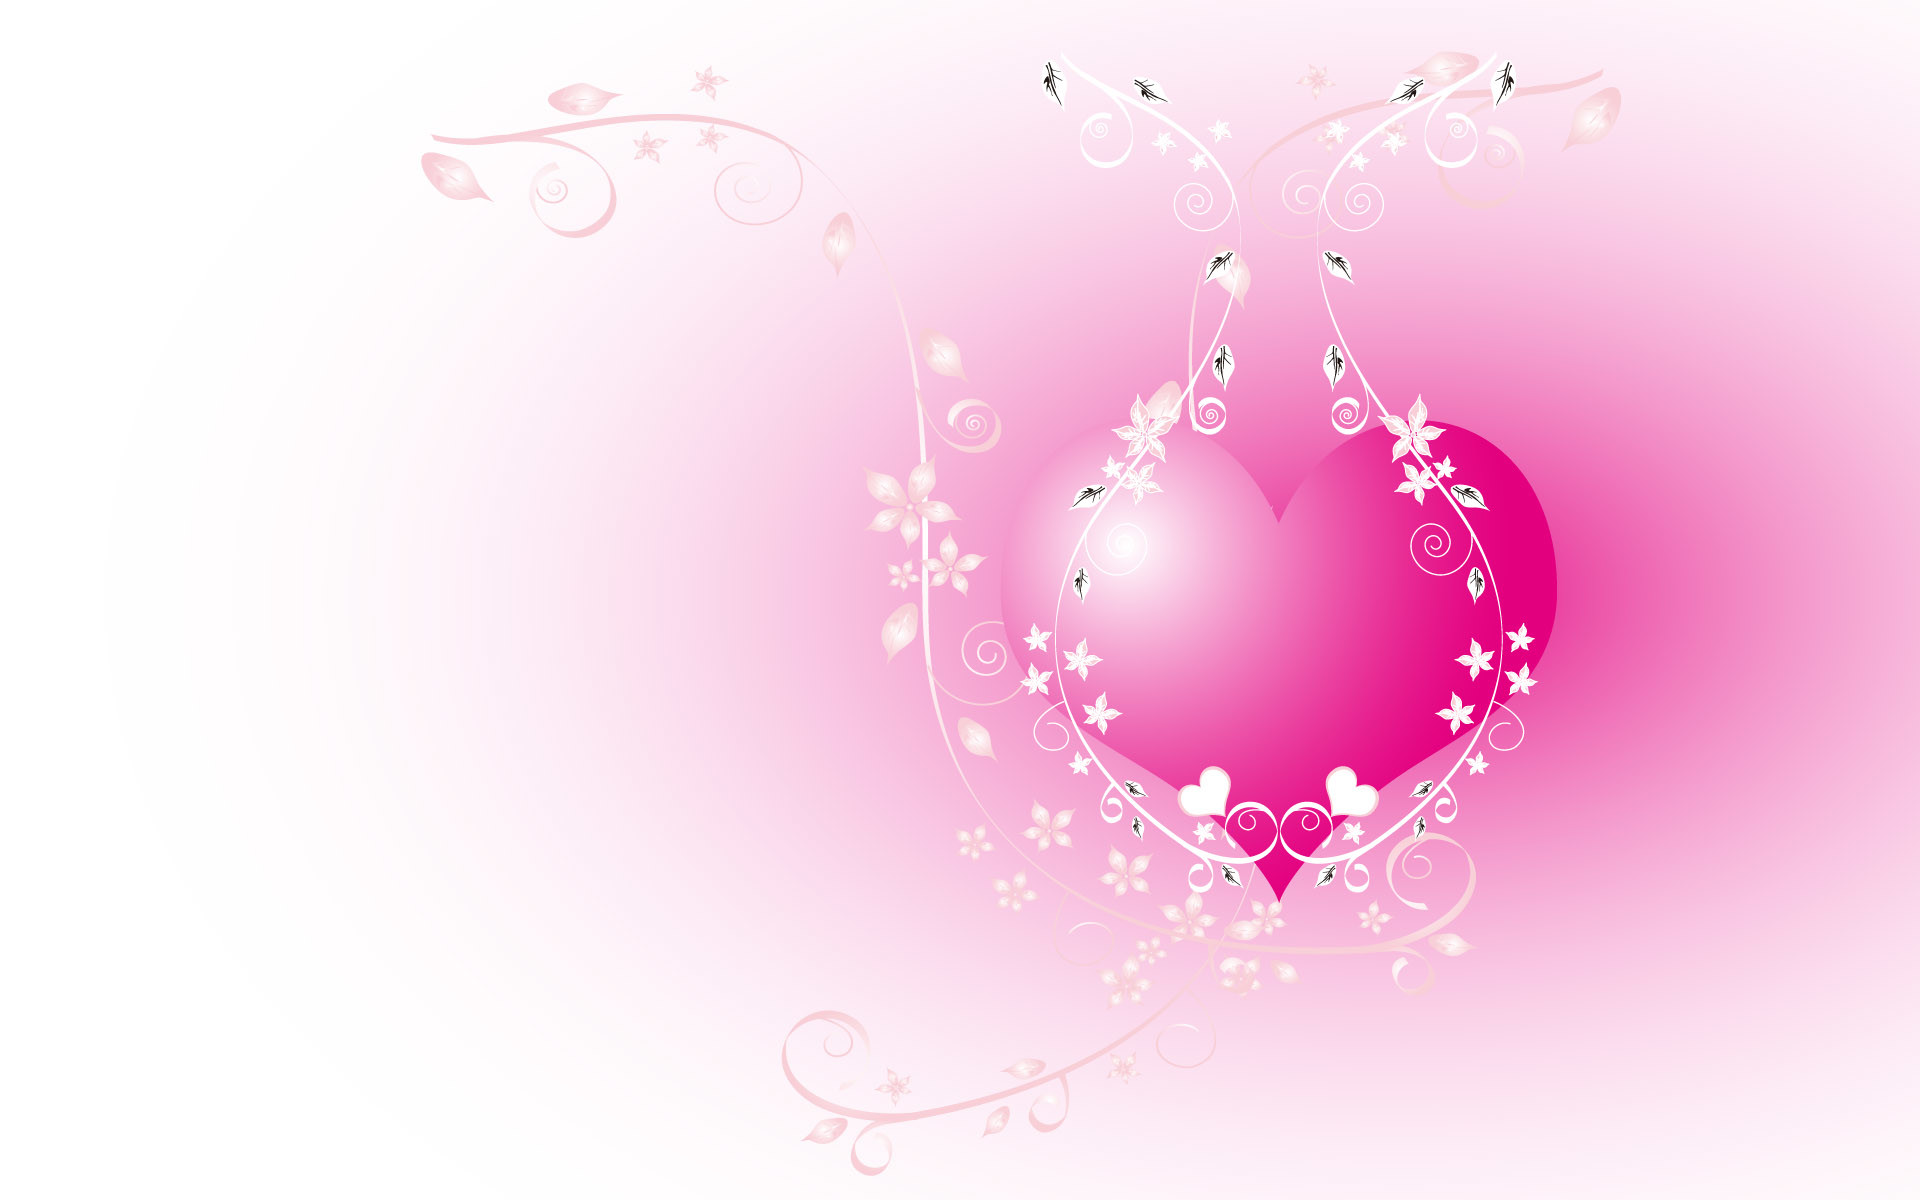 Download Hearts wallpaper, the pink heart image